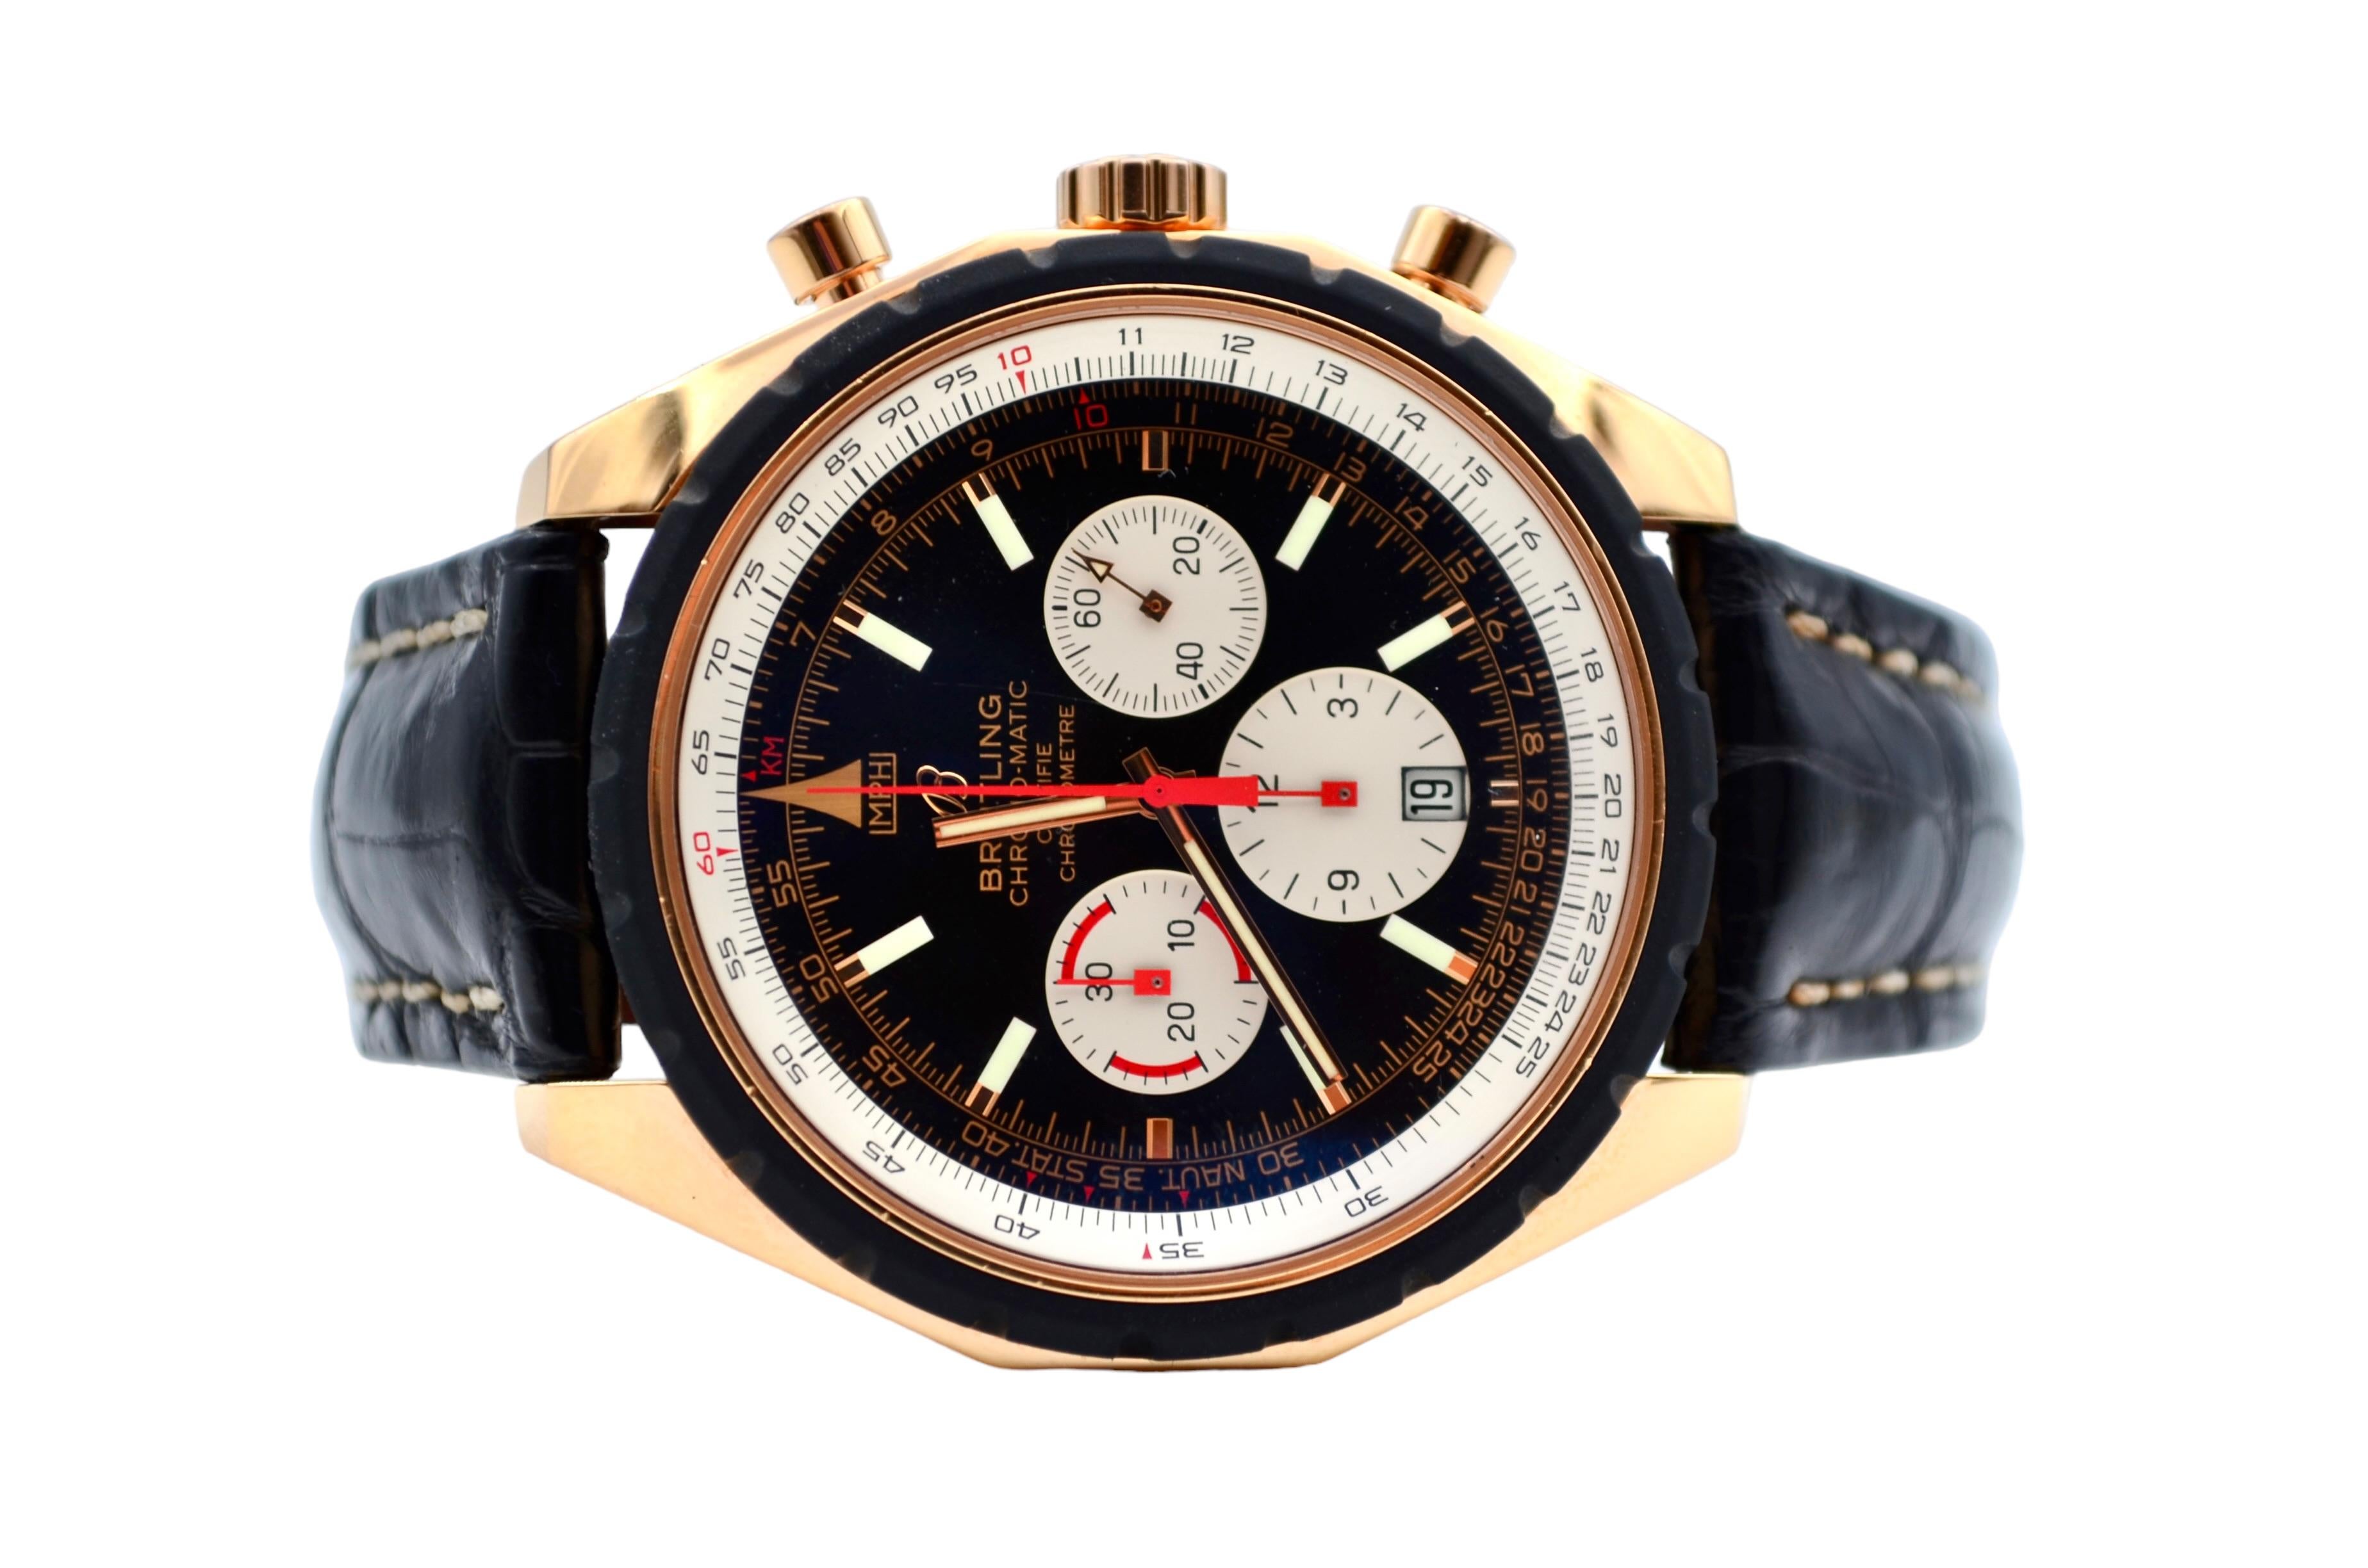 Breitling Chrono-matic 49mm Navitimer Gold Limited Edition Ref R1436002 1